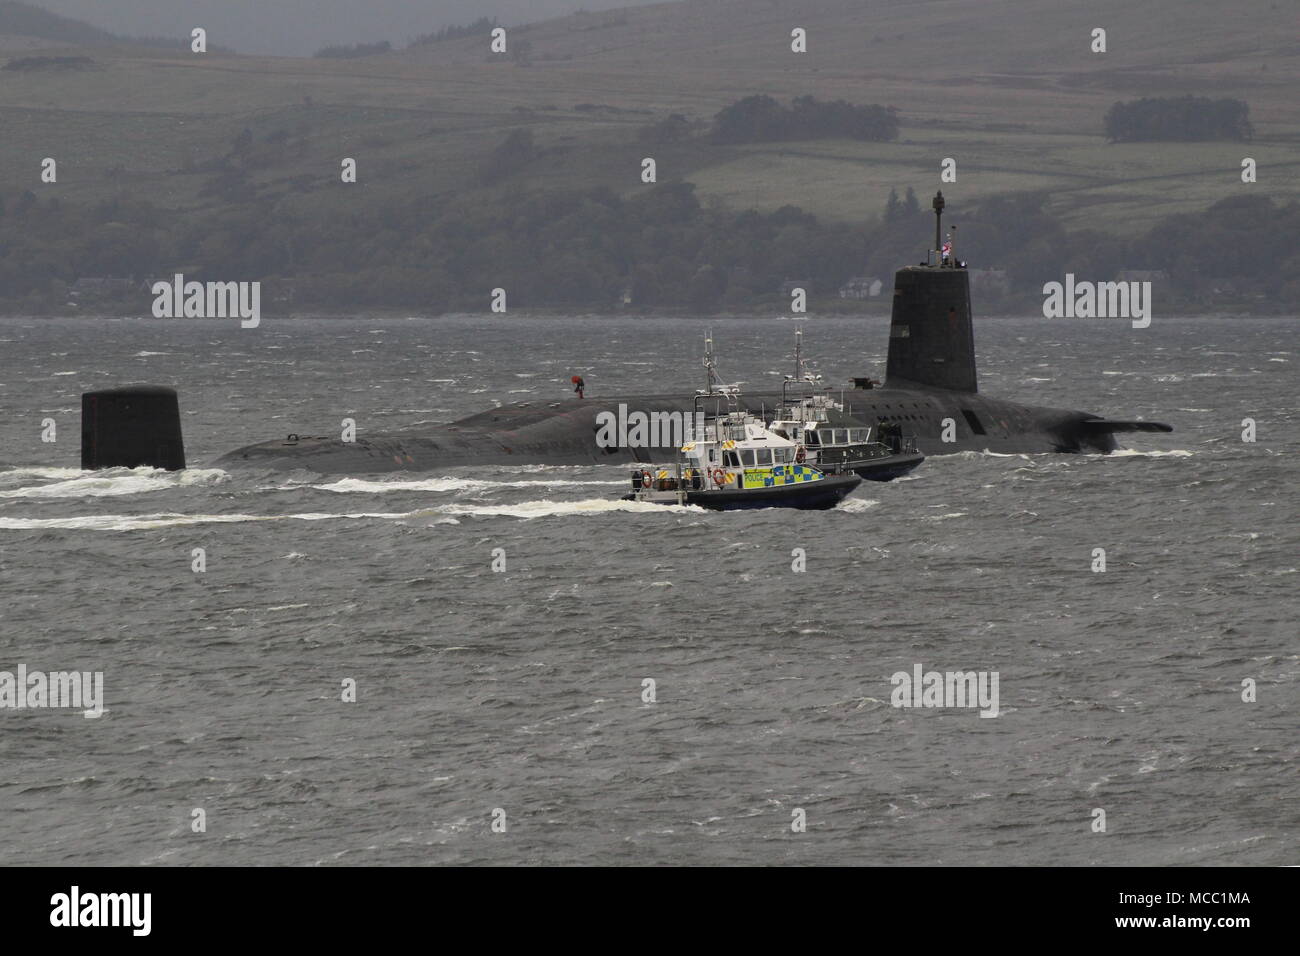 HMS Victorious (S29), a Vanguard-class submarine operated by the Royal Navy, passing Gourock on an inbound journey to the Faslane naval base. Stock Photo